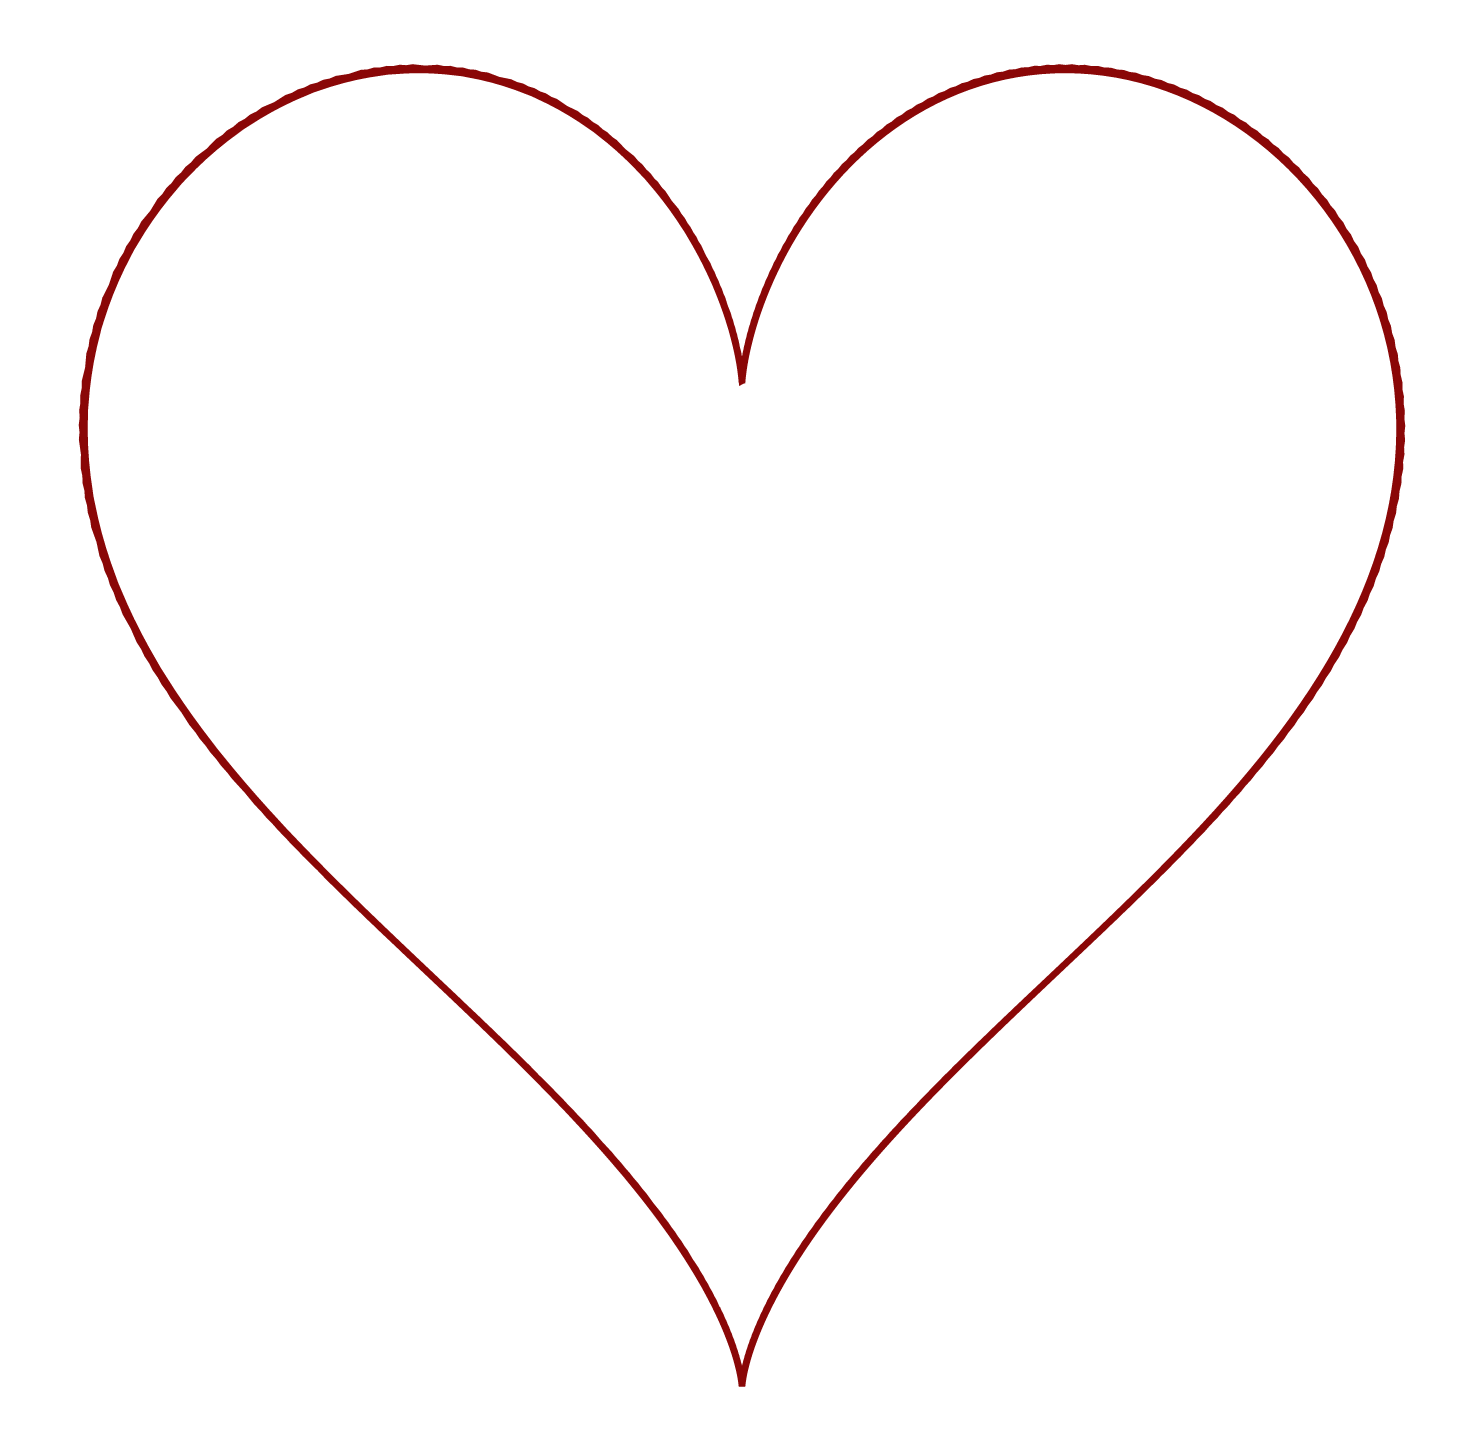 Animating a heart shaped curve with d3.js